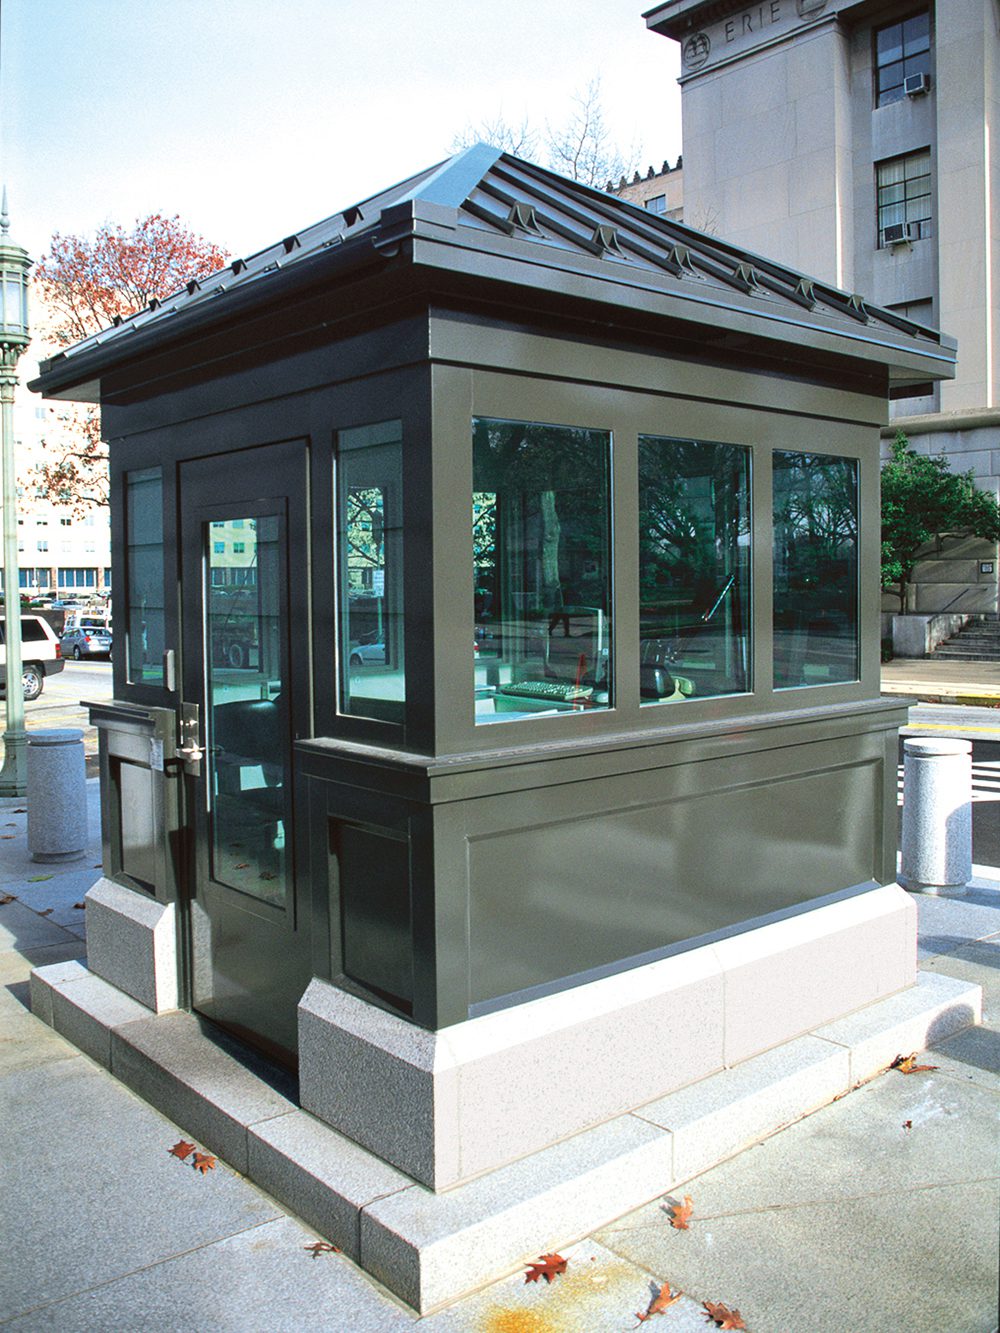 Dark gray, metal guard booth with large windows and pyramid-shaped roof